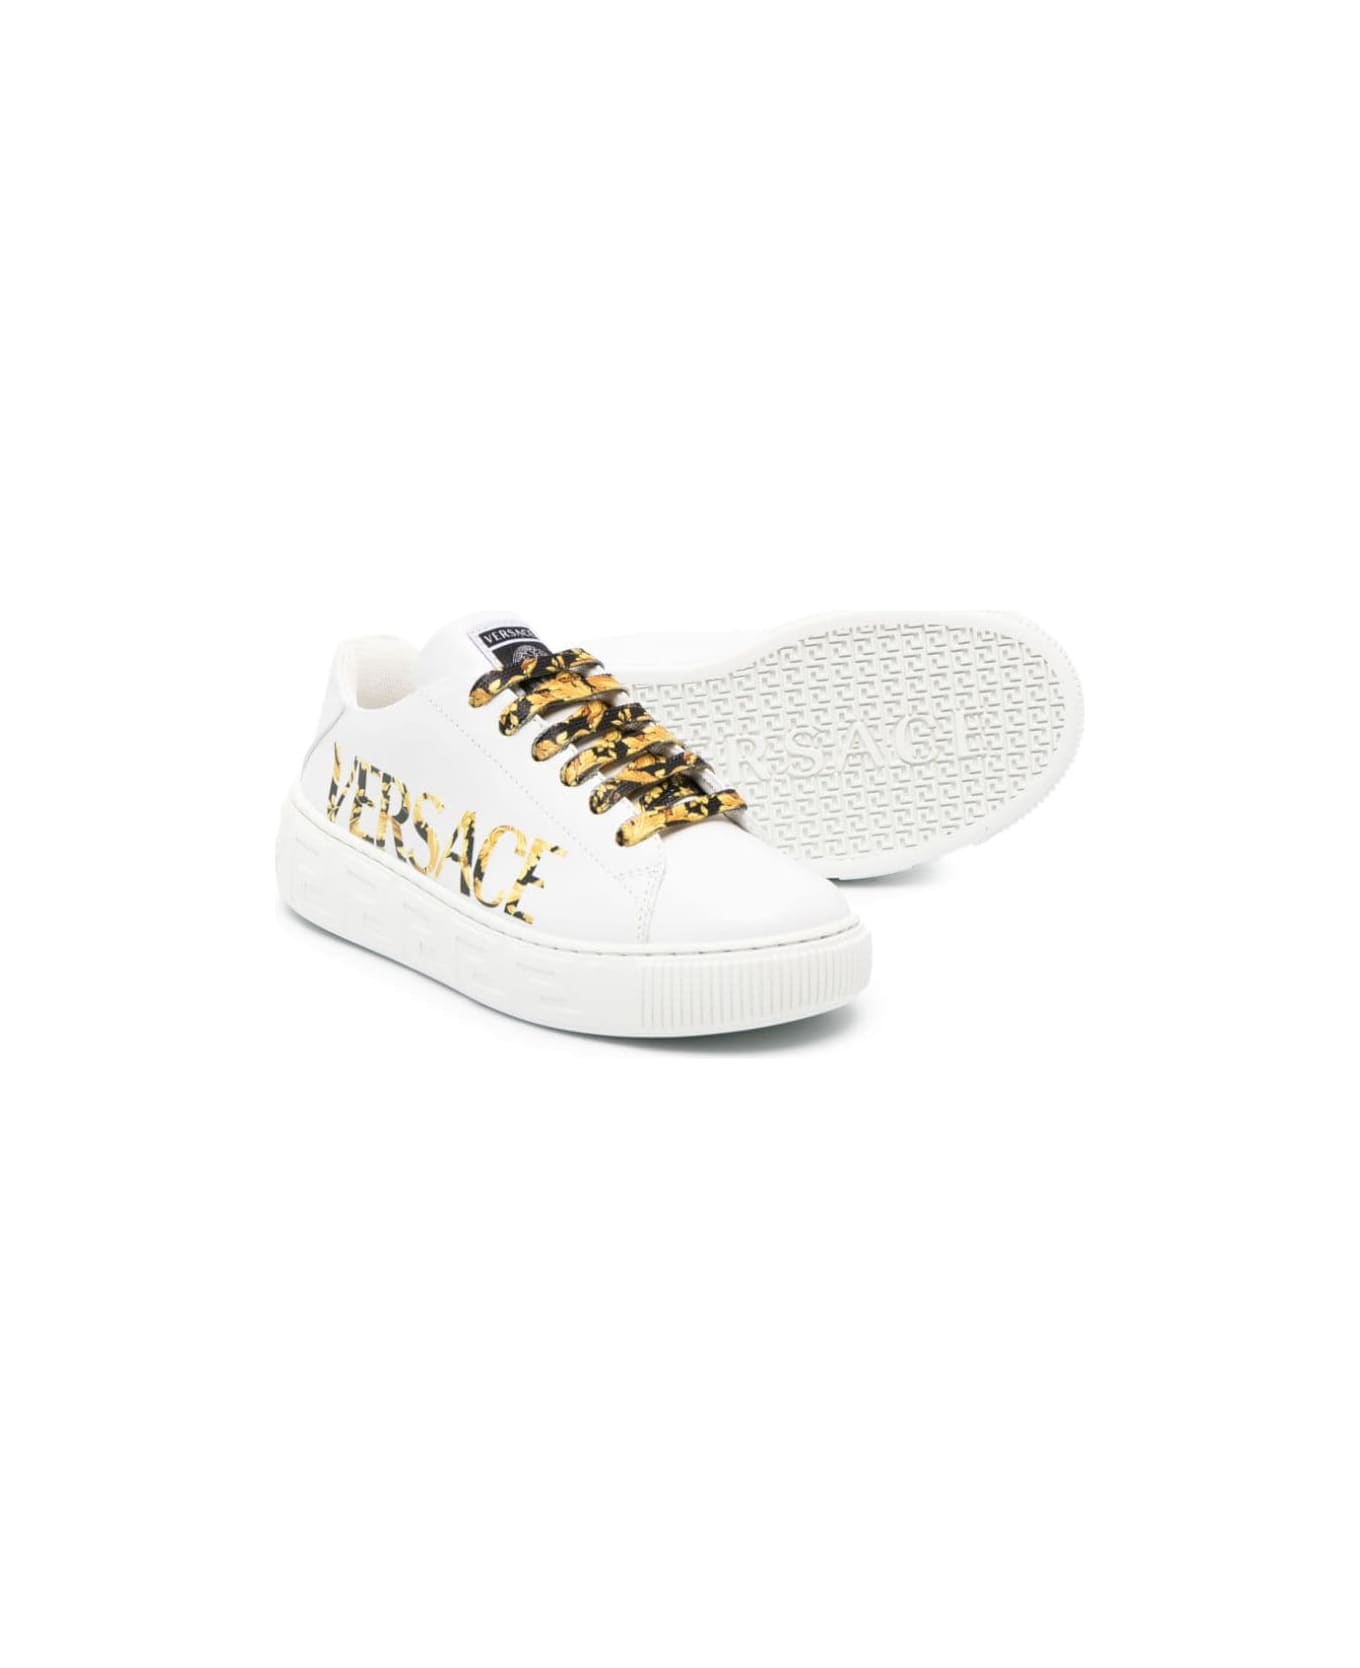 Versace Sneakers Bianche In Pelle Bambina - Bianco